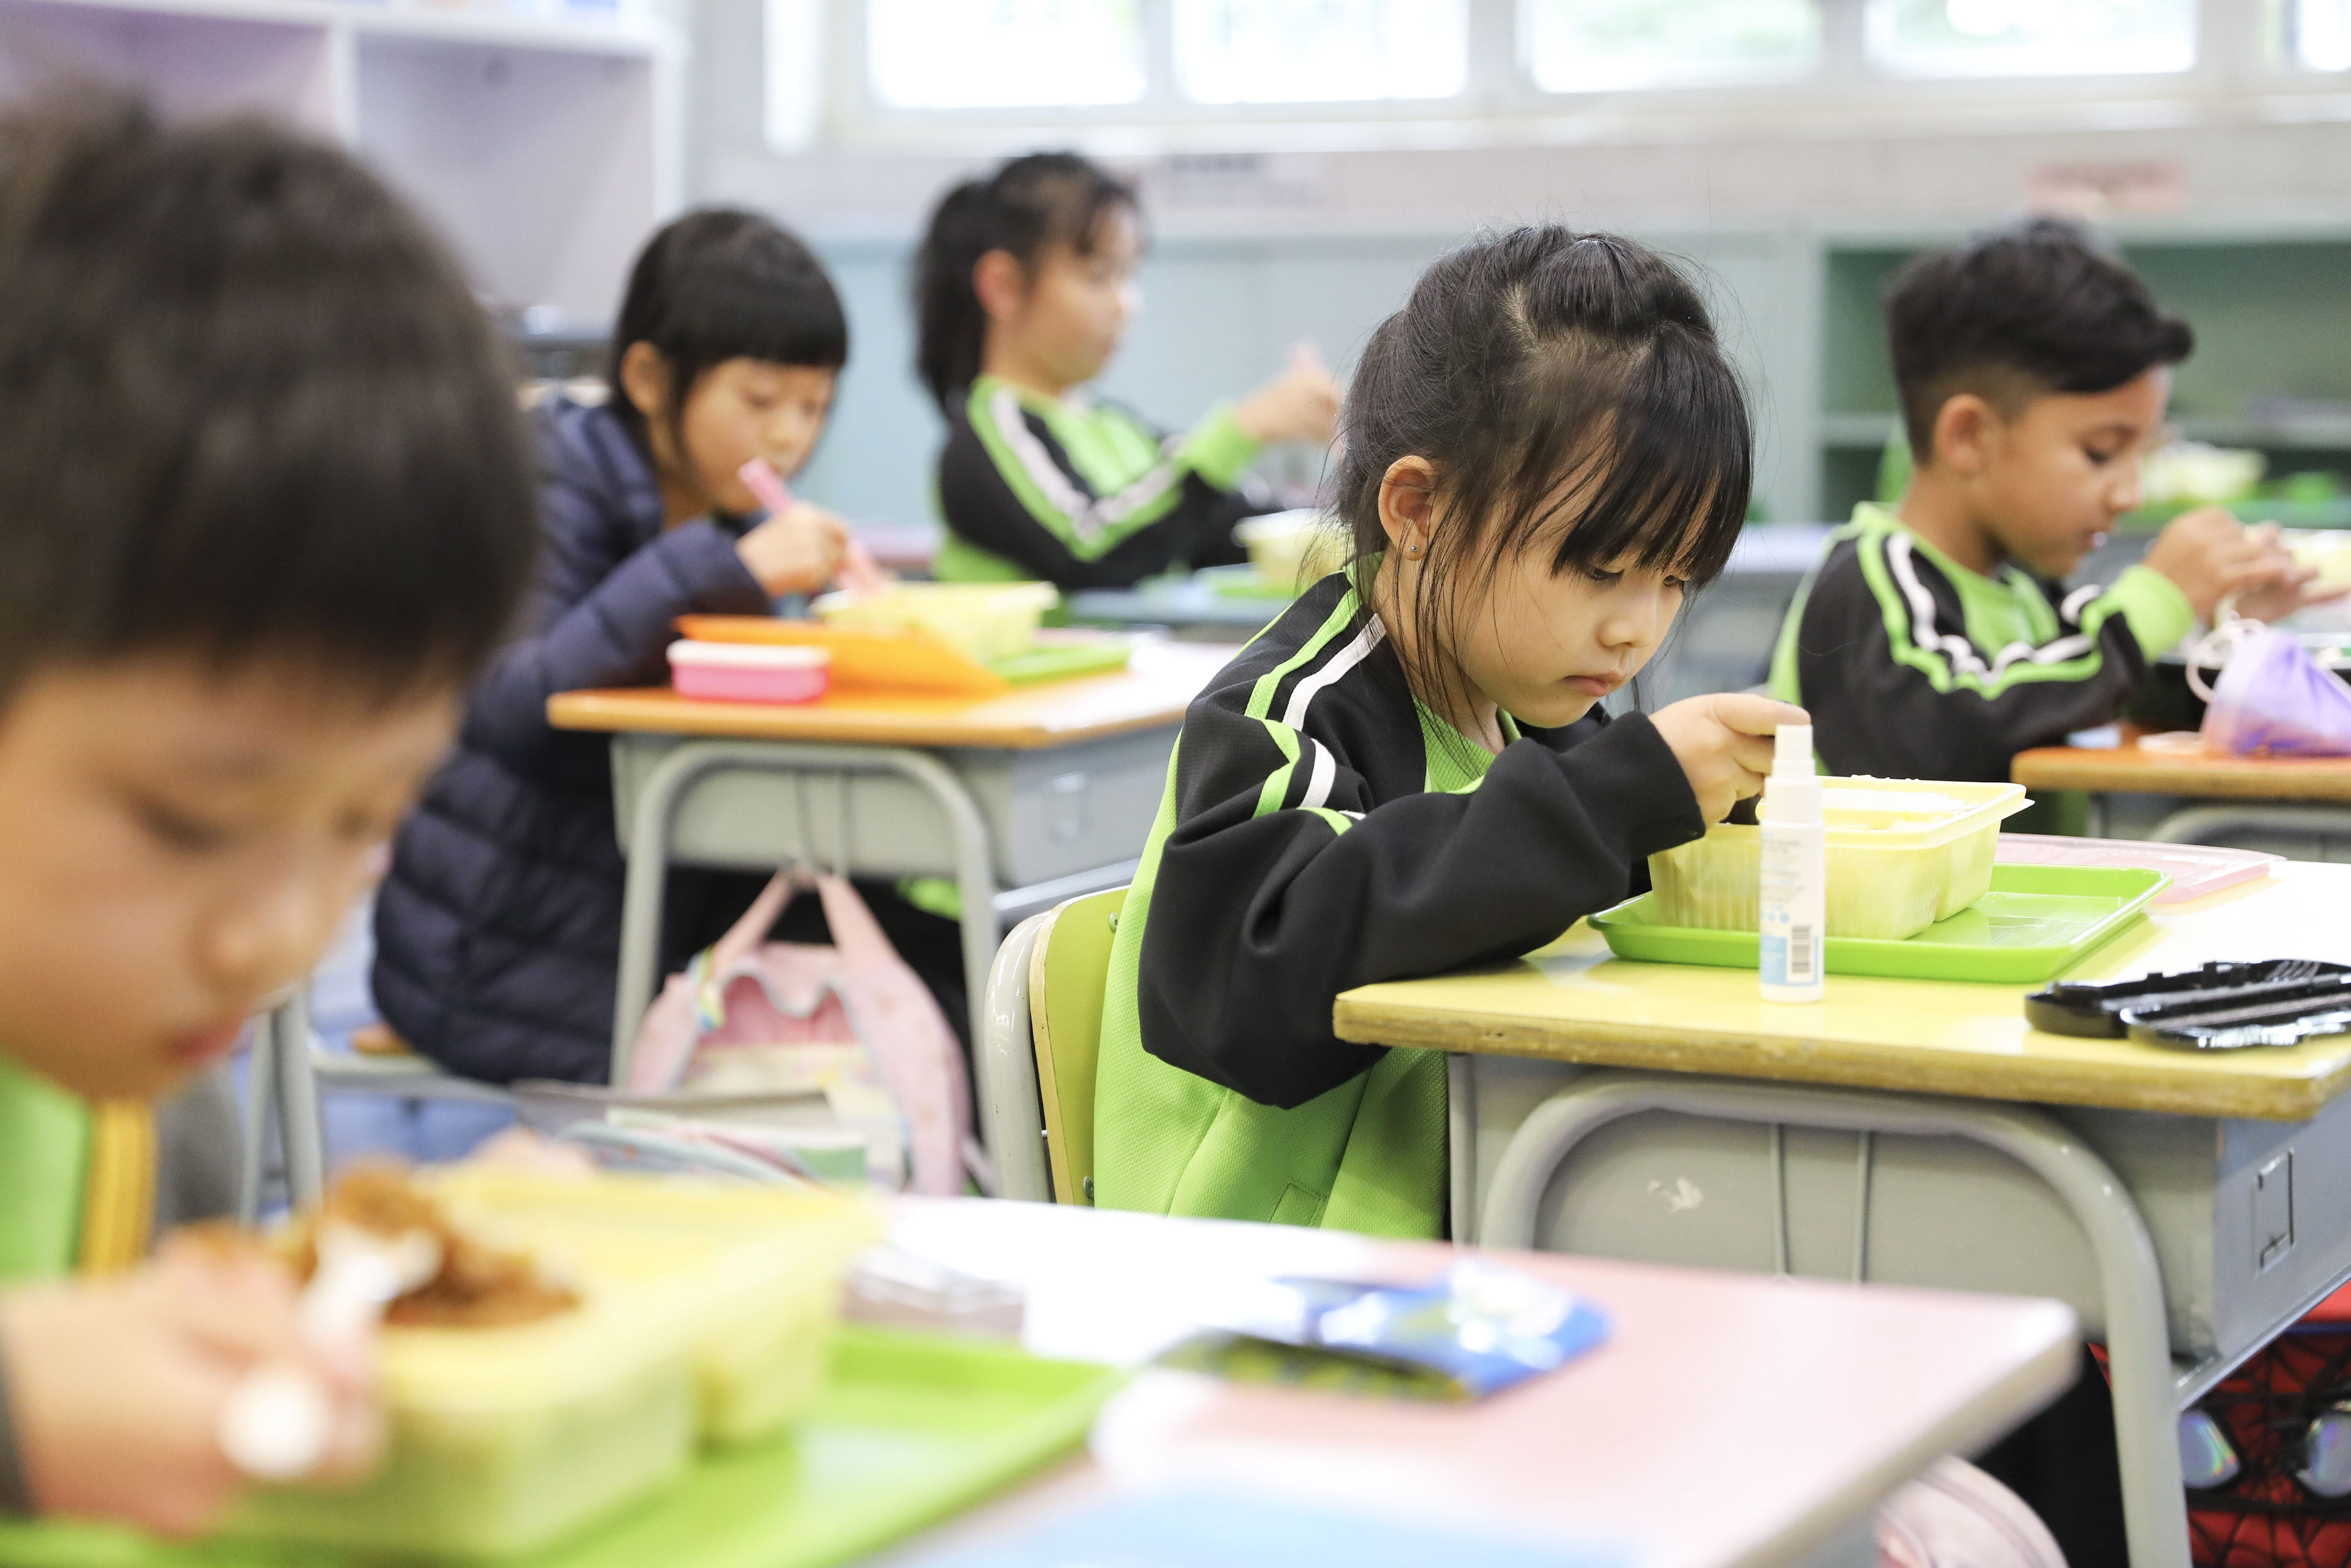 Some primary school students resume full-day, in-person classes on Thursday. Photo: Elson Li